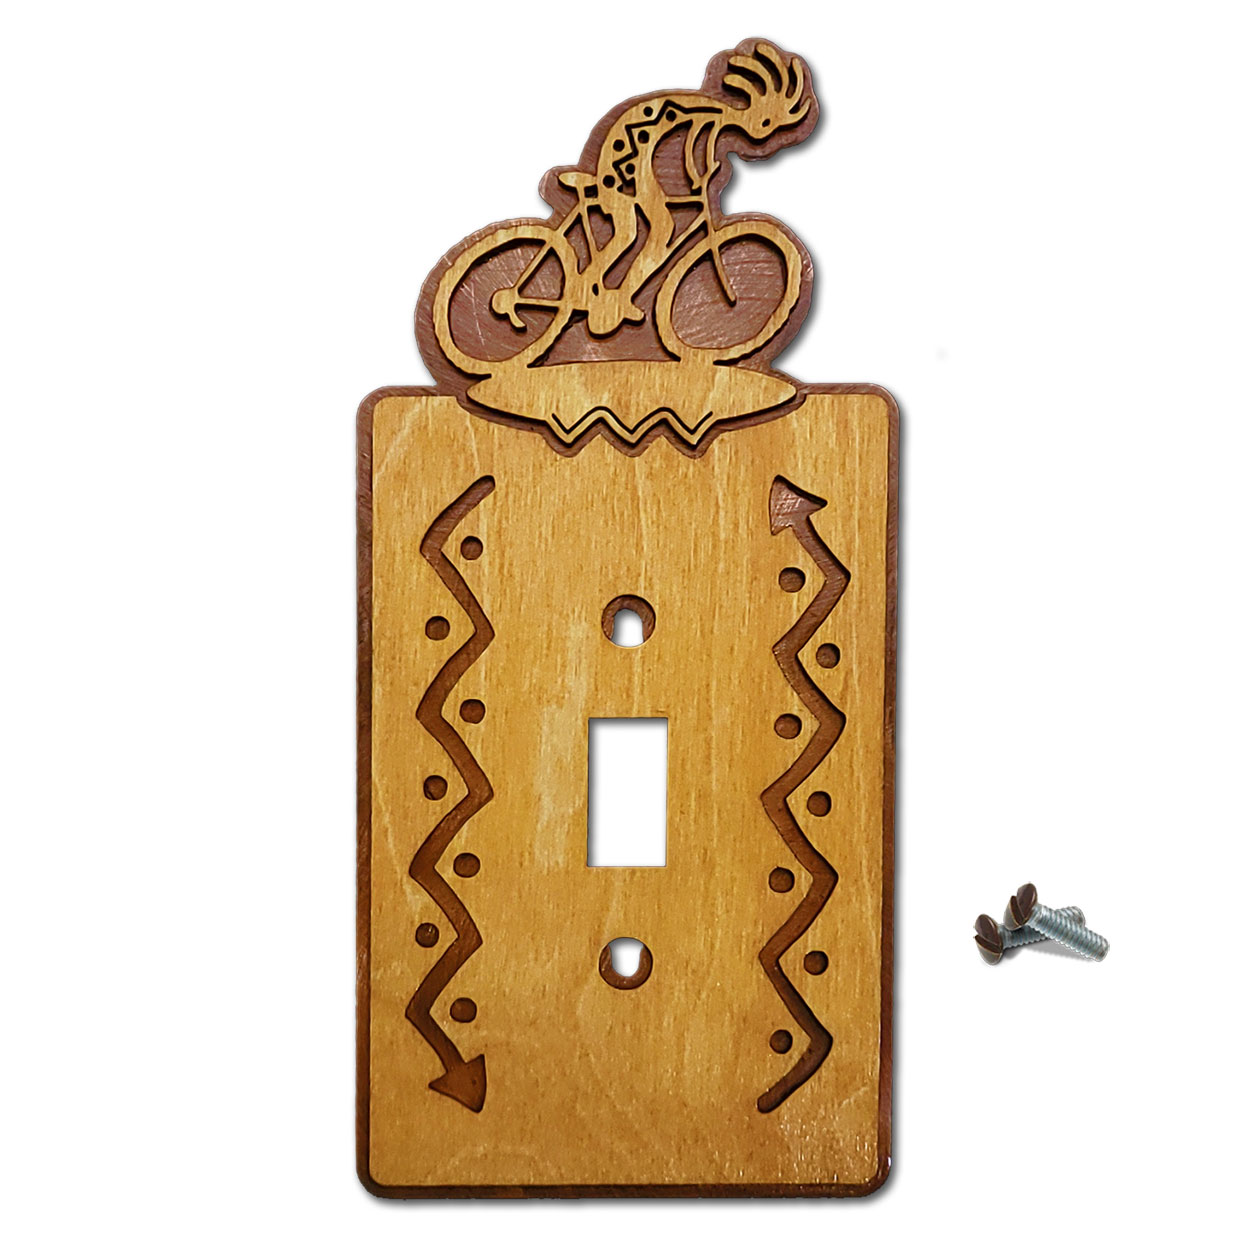 167521S - Bicyclist Cycling Theme Single Standard Switch Plate in Golden Sienna